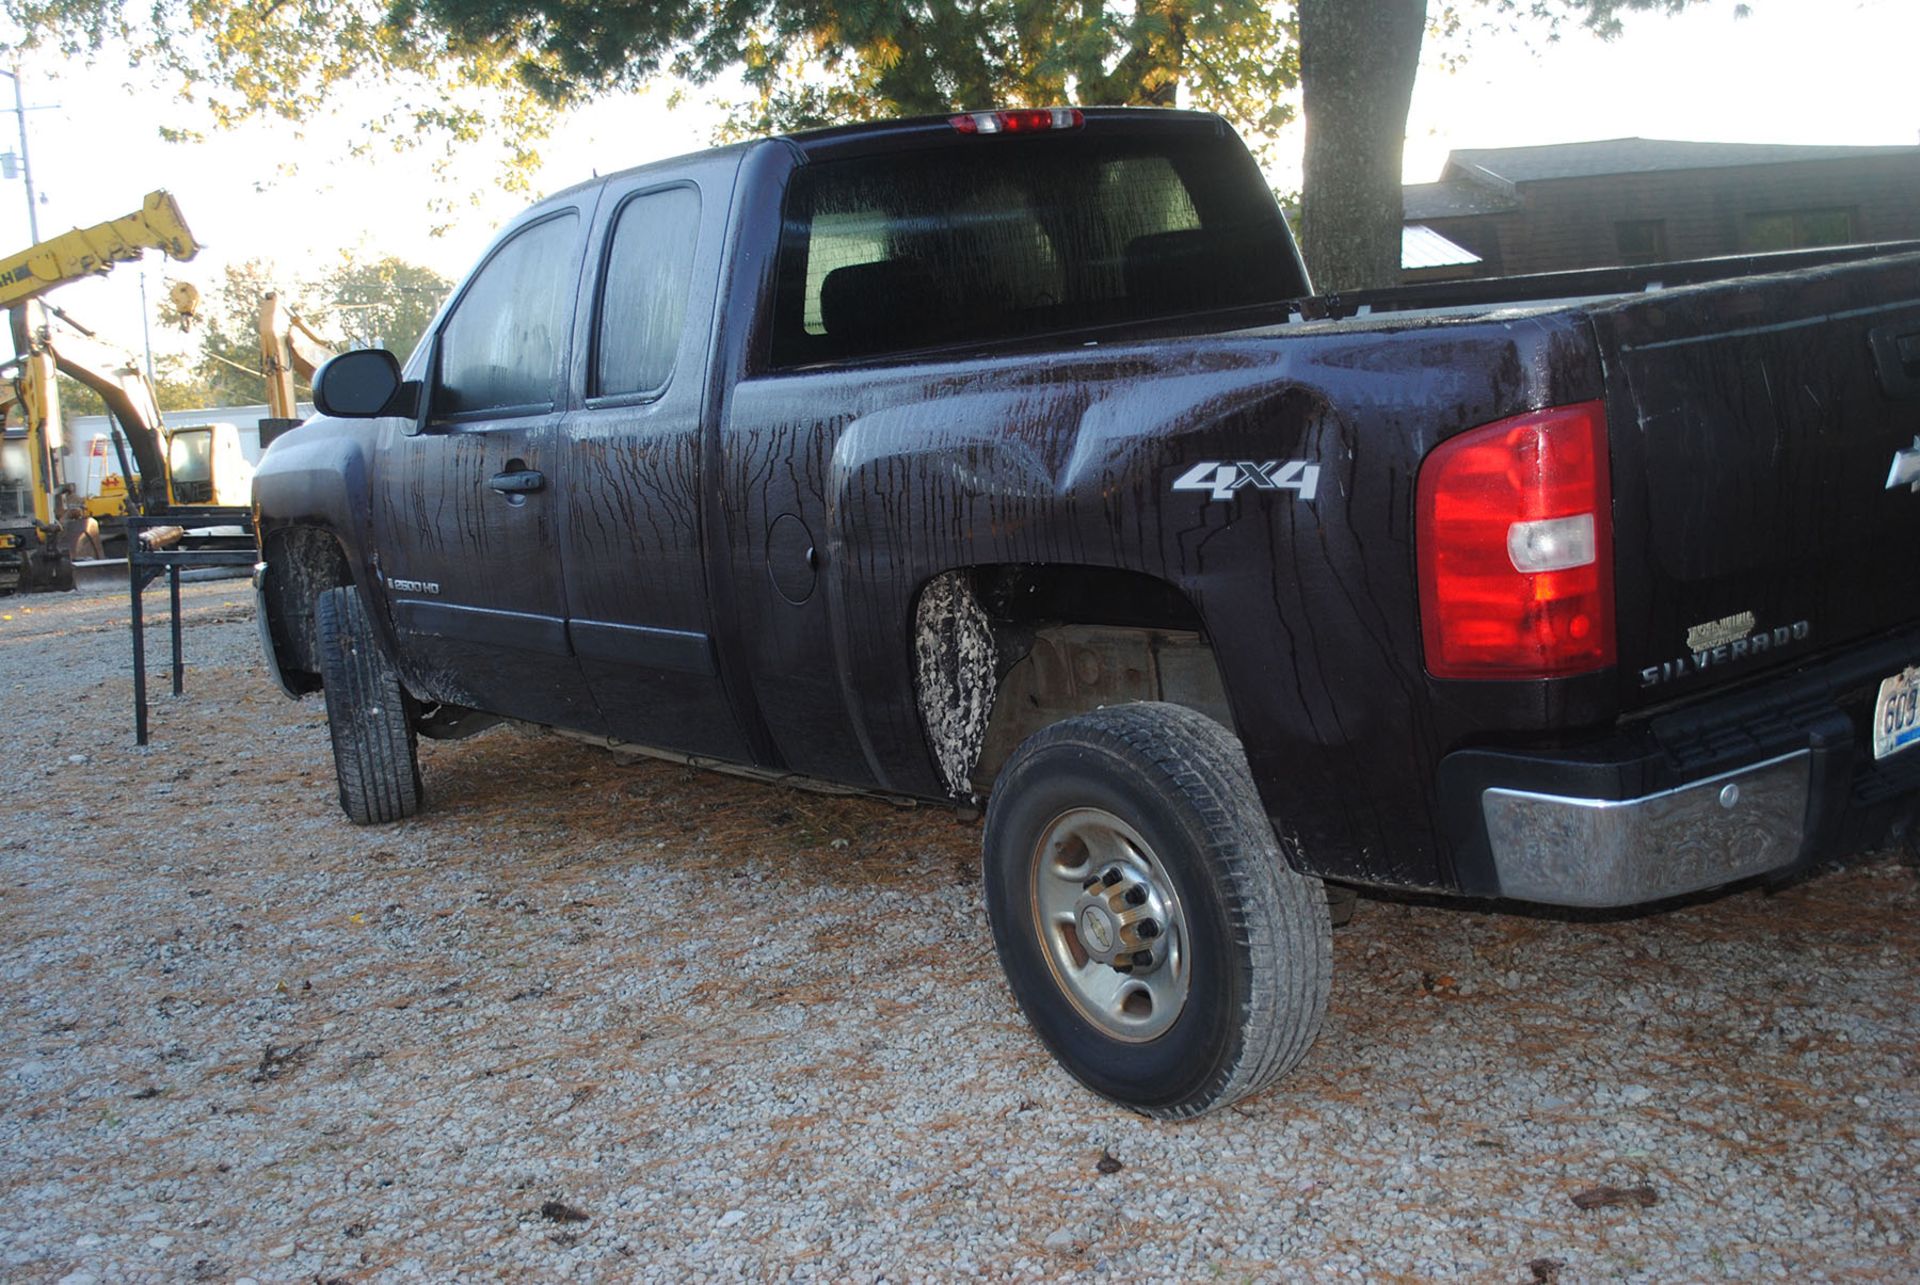 2008 CHEVY SILVERADO TRUCK WITH EXTENDED CAB, 6-LITER, V8, 4WD, POWER WINDOWS & LOCKS, 329,167 - Image 2 of 4